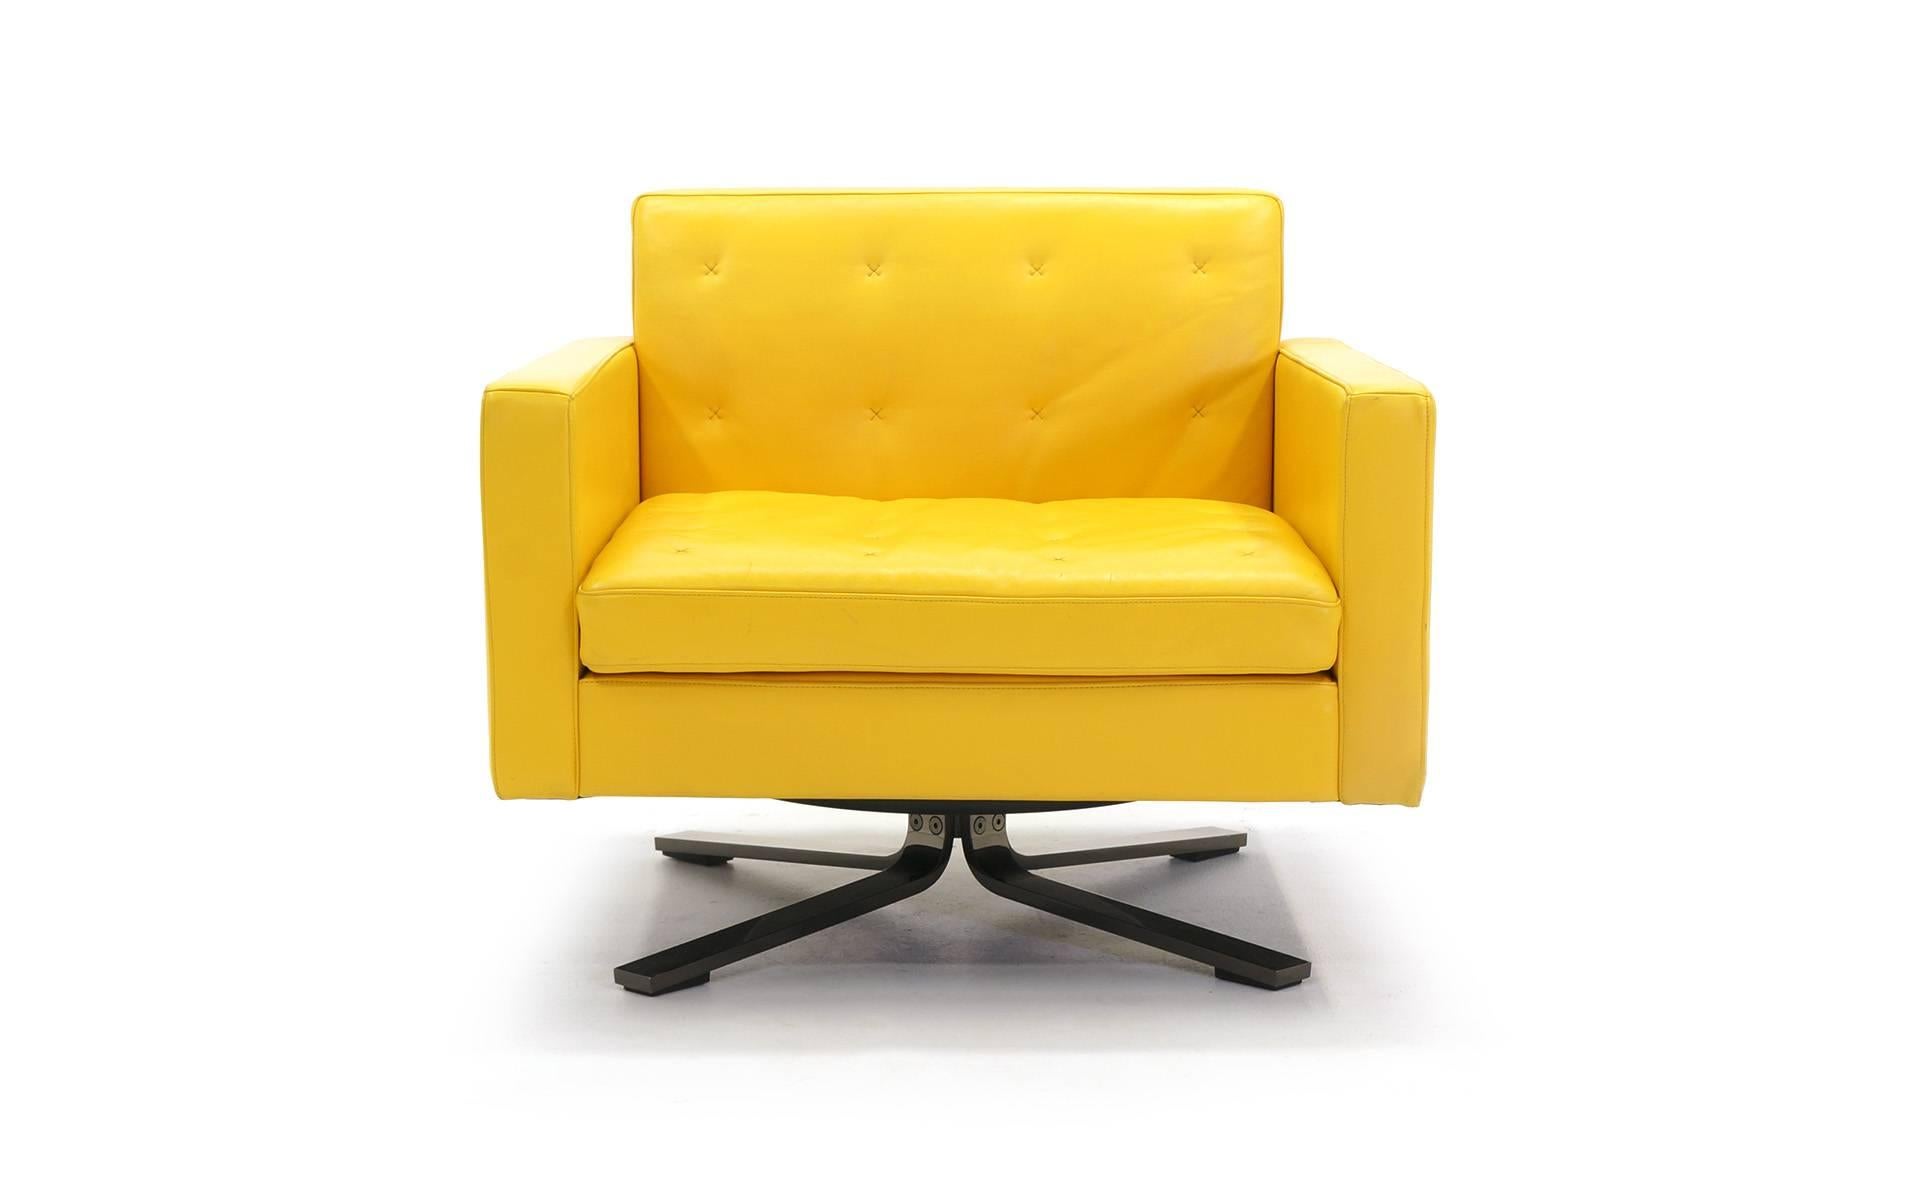 Leather and drawn steel swivel lounge chair designed by Jean-Marie Massaud  for Potrona Frau.  It is upholstered in Pelle Frau® yellow leather.  The delicate 'X' motif is hand-sewn with contrast stitching (see photos).  The swivel is a 